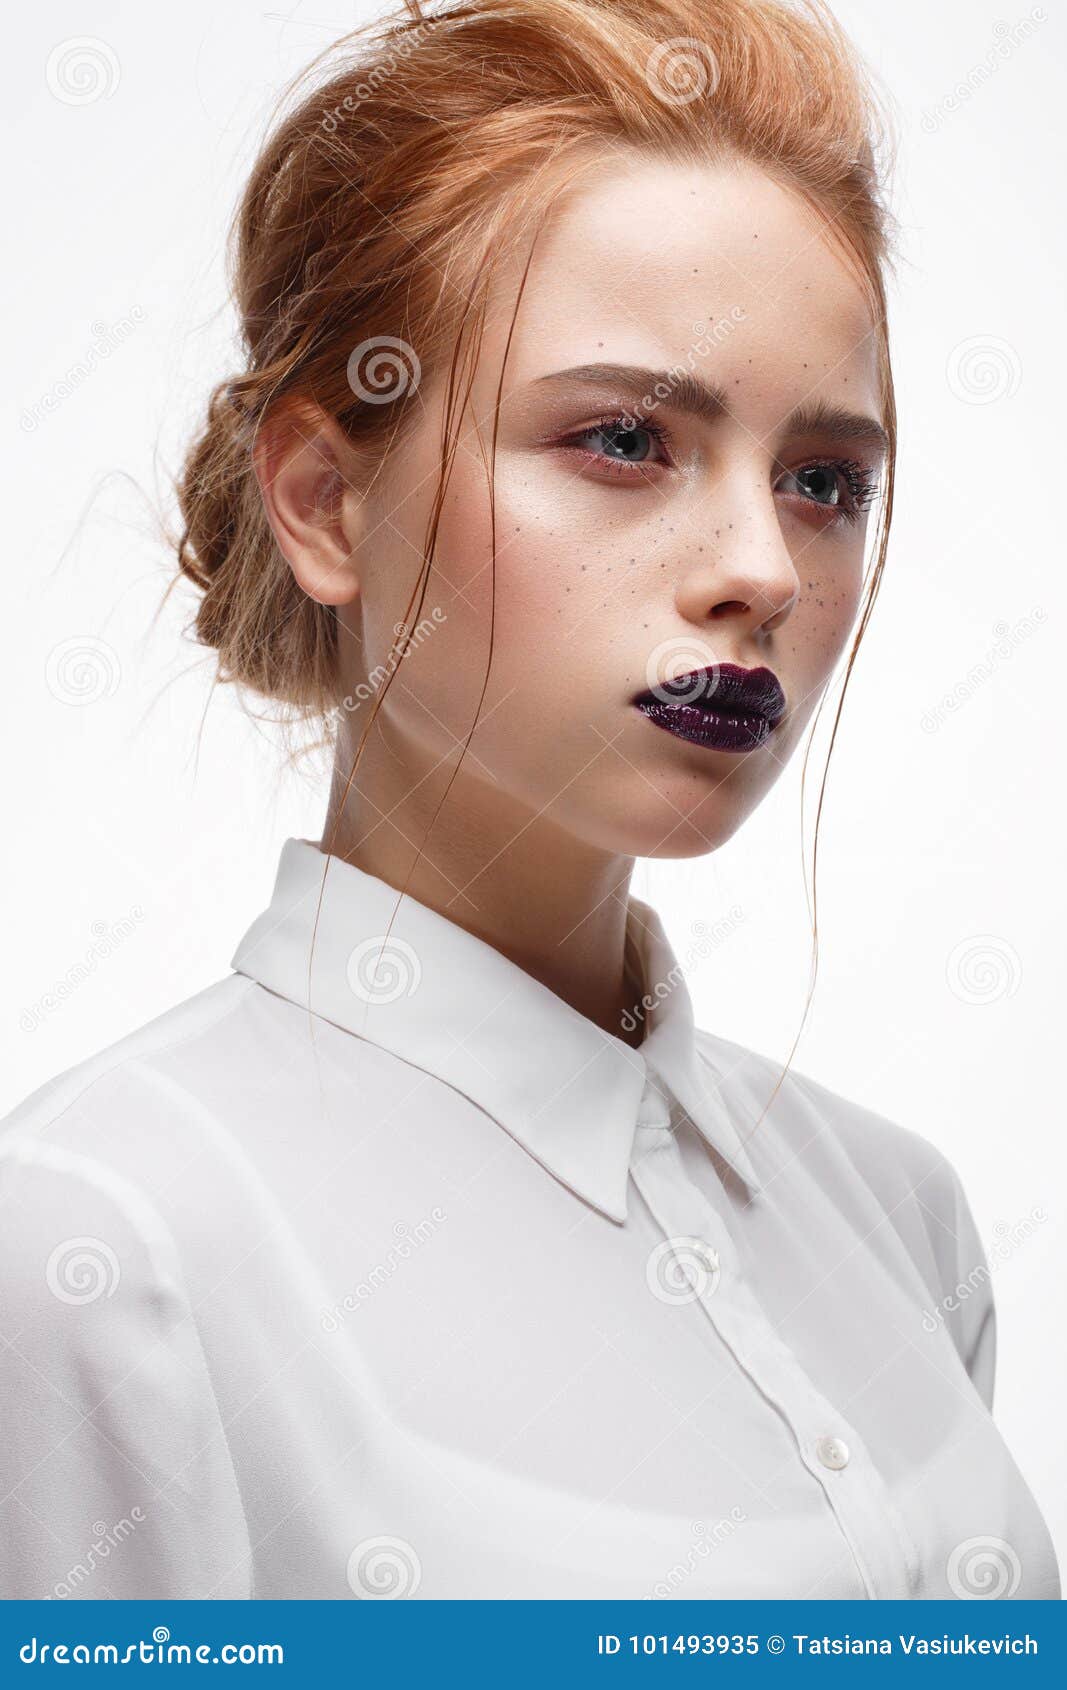 Young Girl with a Haircut in a White Shirt. Beautiful Model with Nude Make- up and Bright Lips Stock Image - Image of redhaired, light: 101493935